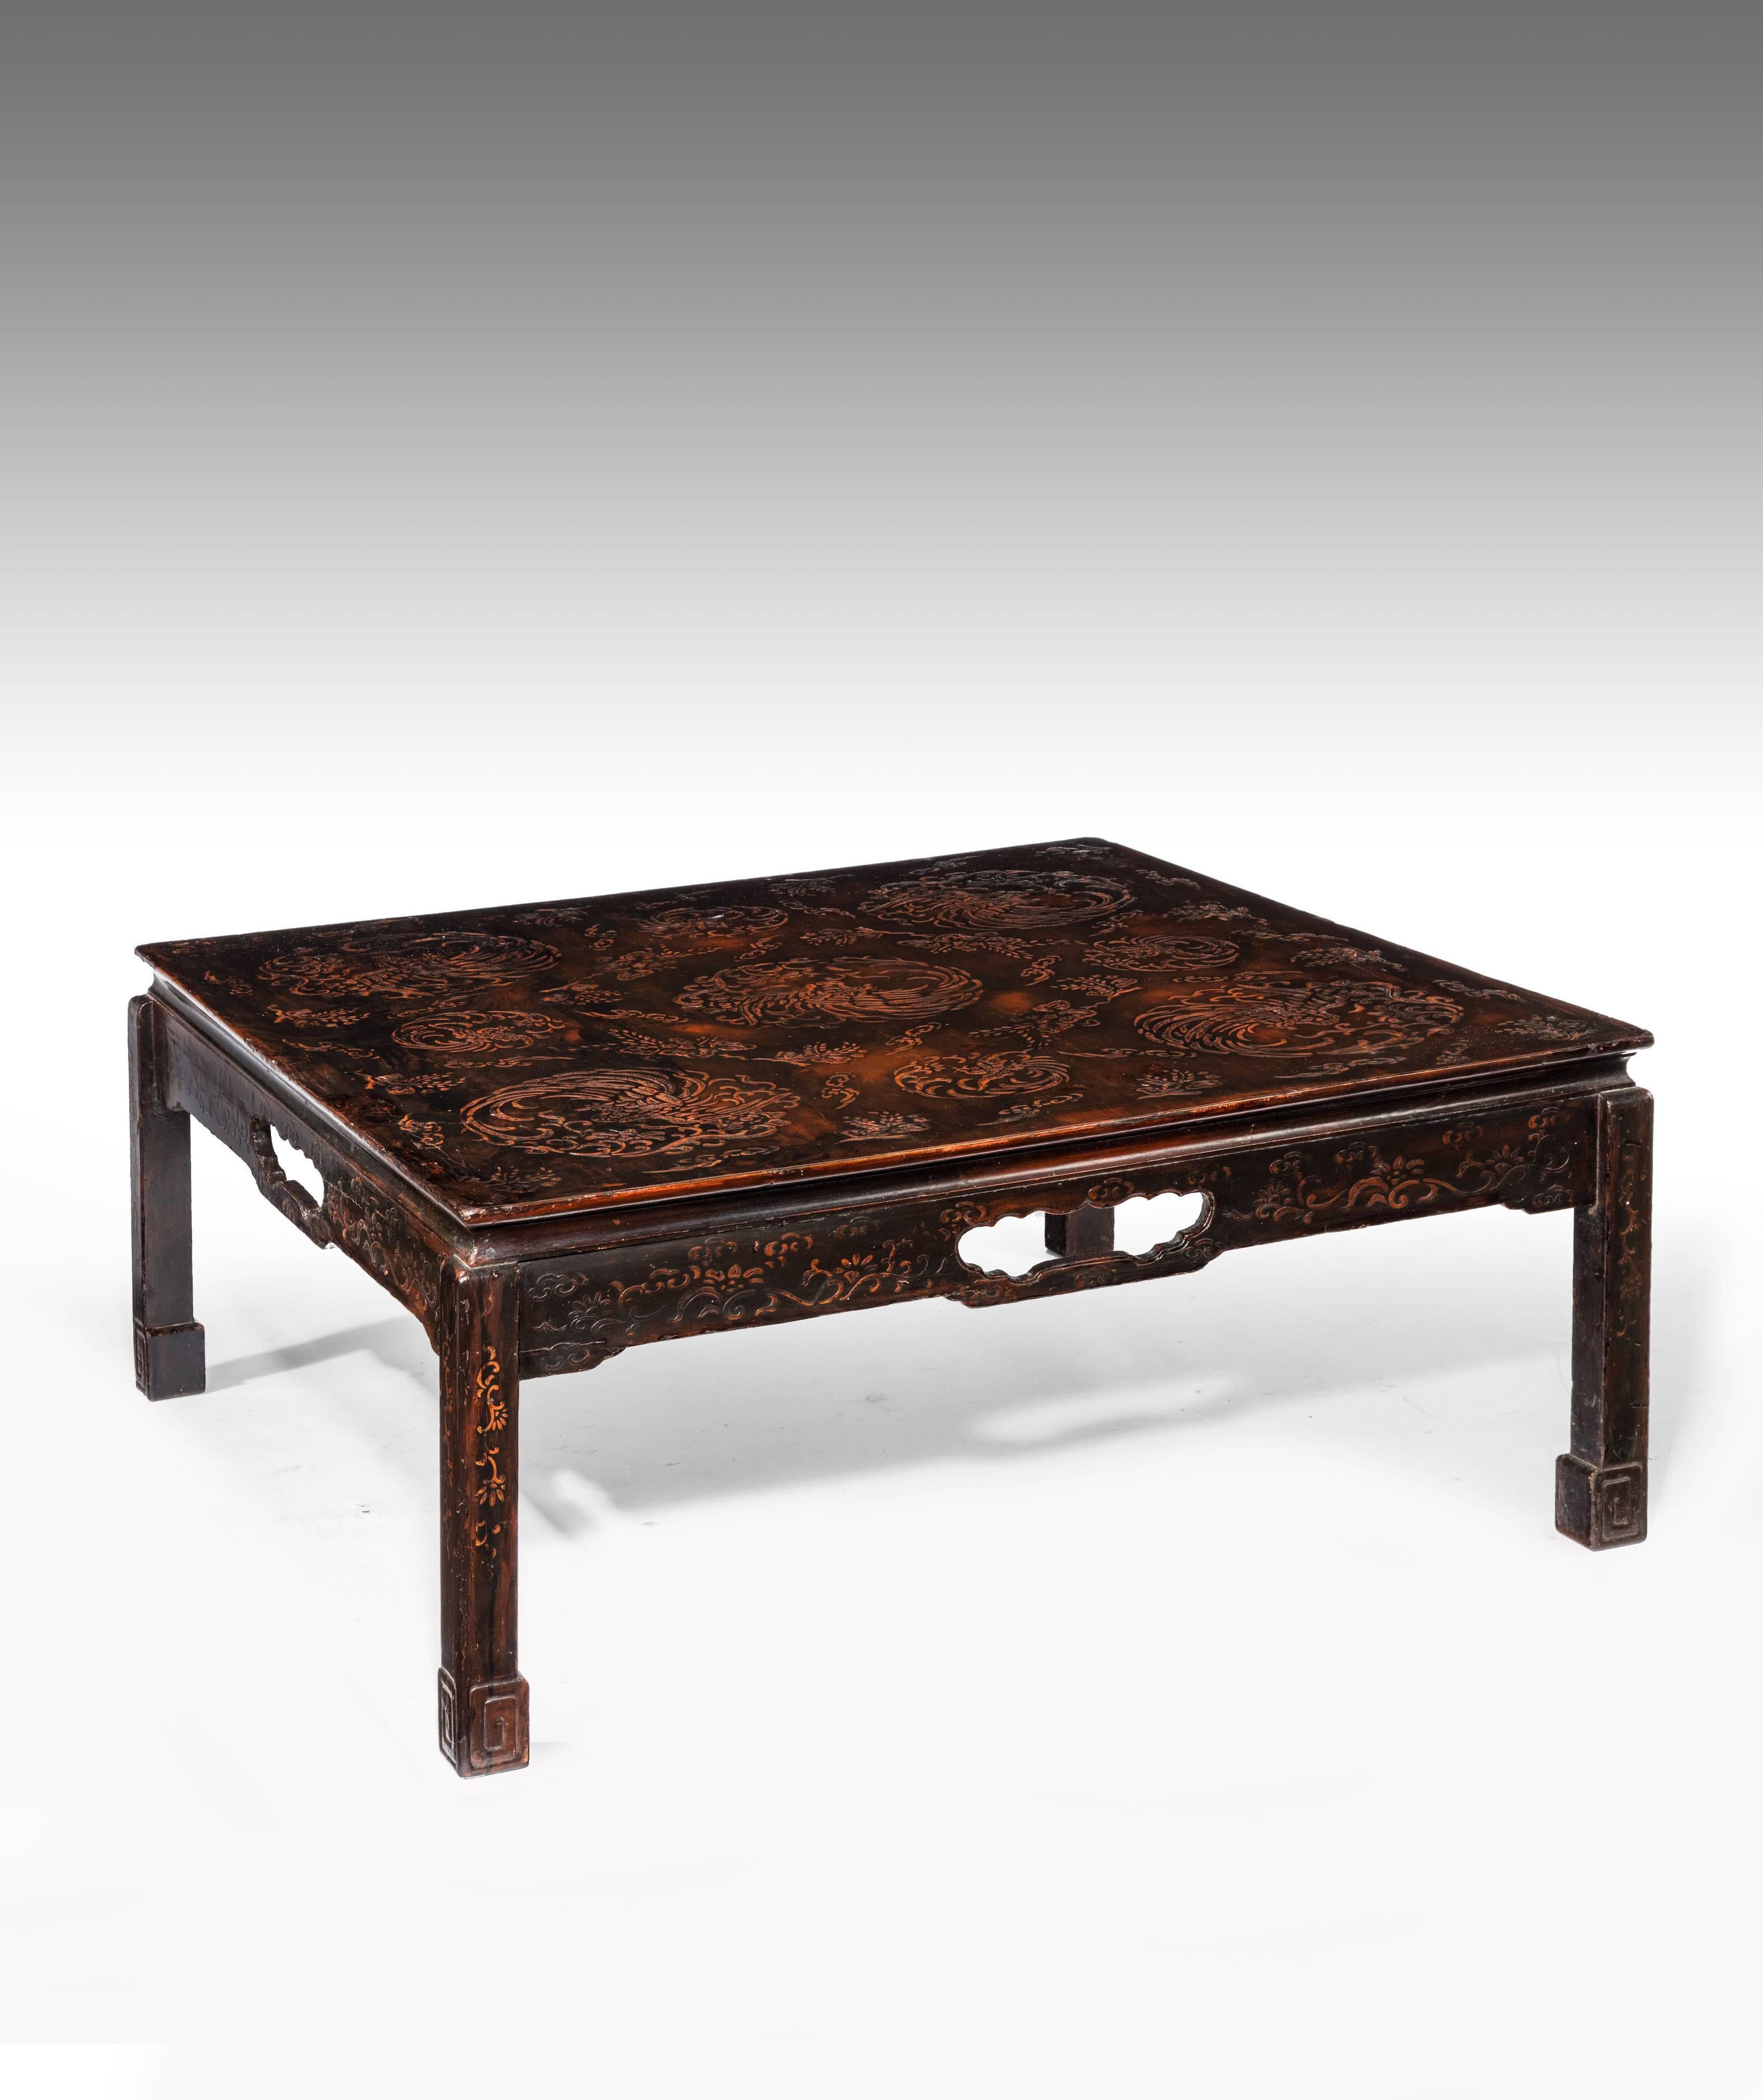 A well-proportioned Chinese raised lacquered Mid-20th century coffee table.
With a square decorative raised lacquered top sitting over a shaped frieze with a central fretted opening supported by four square cut legs with box foot.  

In very good